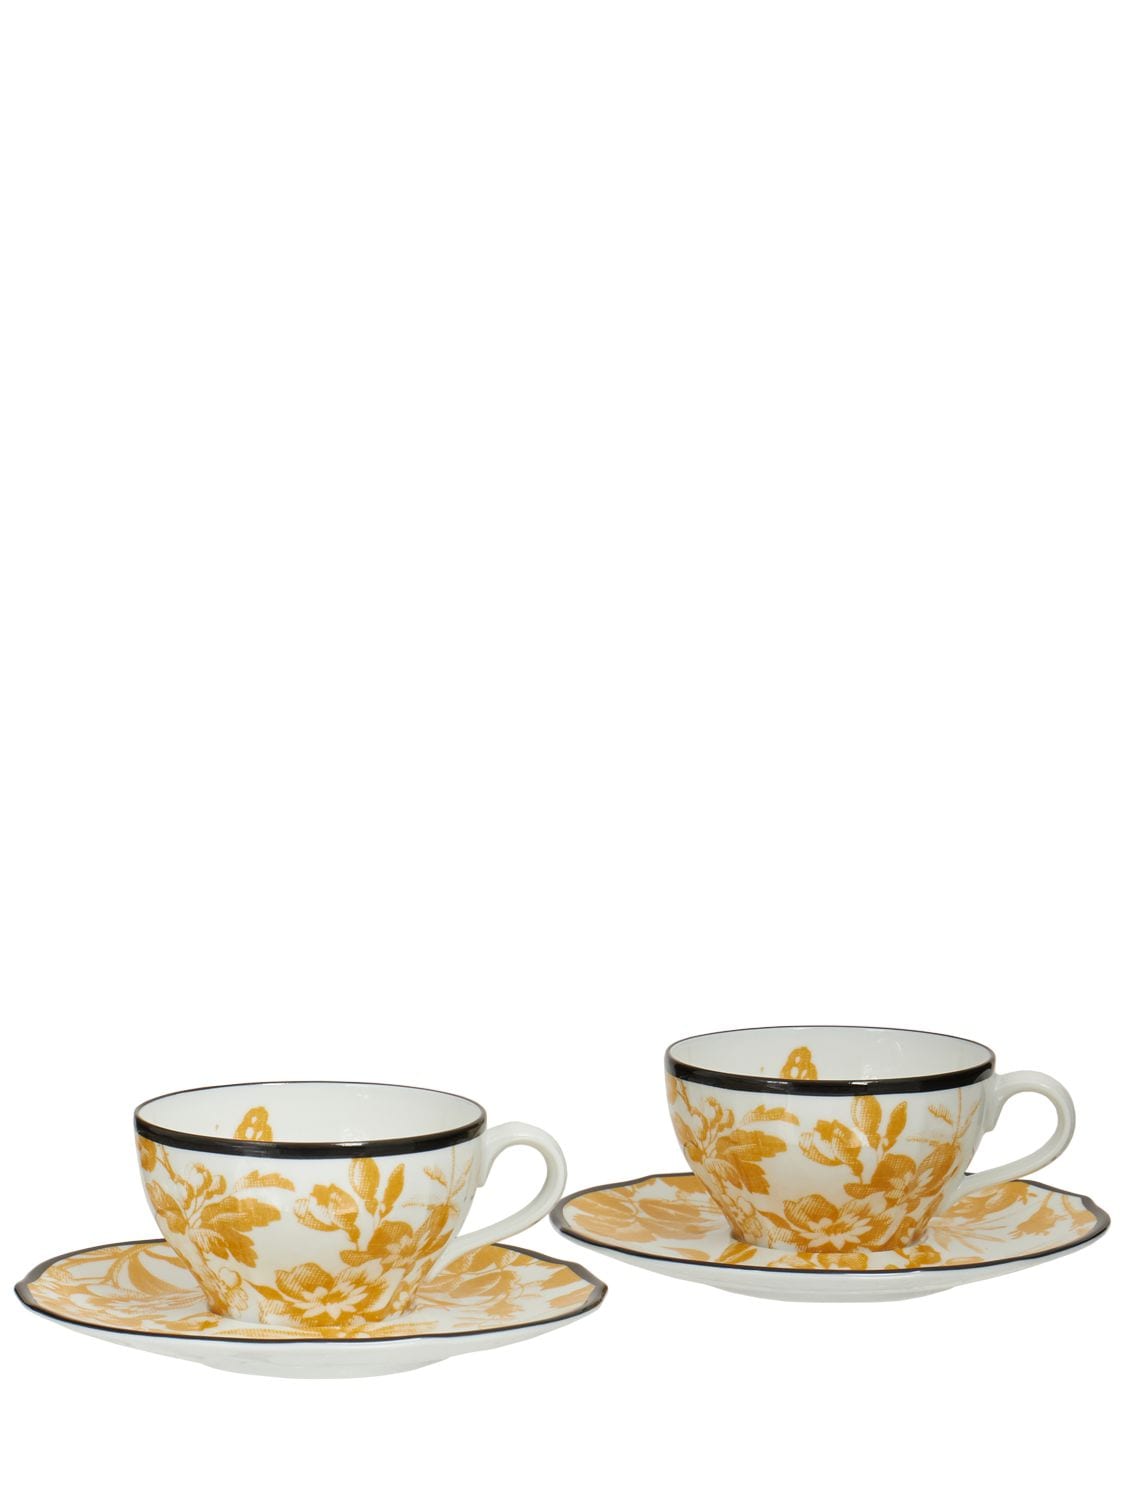 Gucci Set Of 2 Herbarium Cups & Saucers In Sunset Yellow